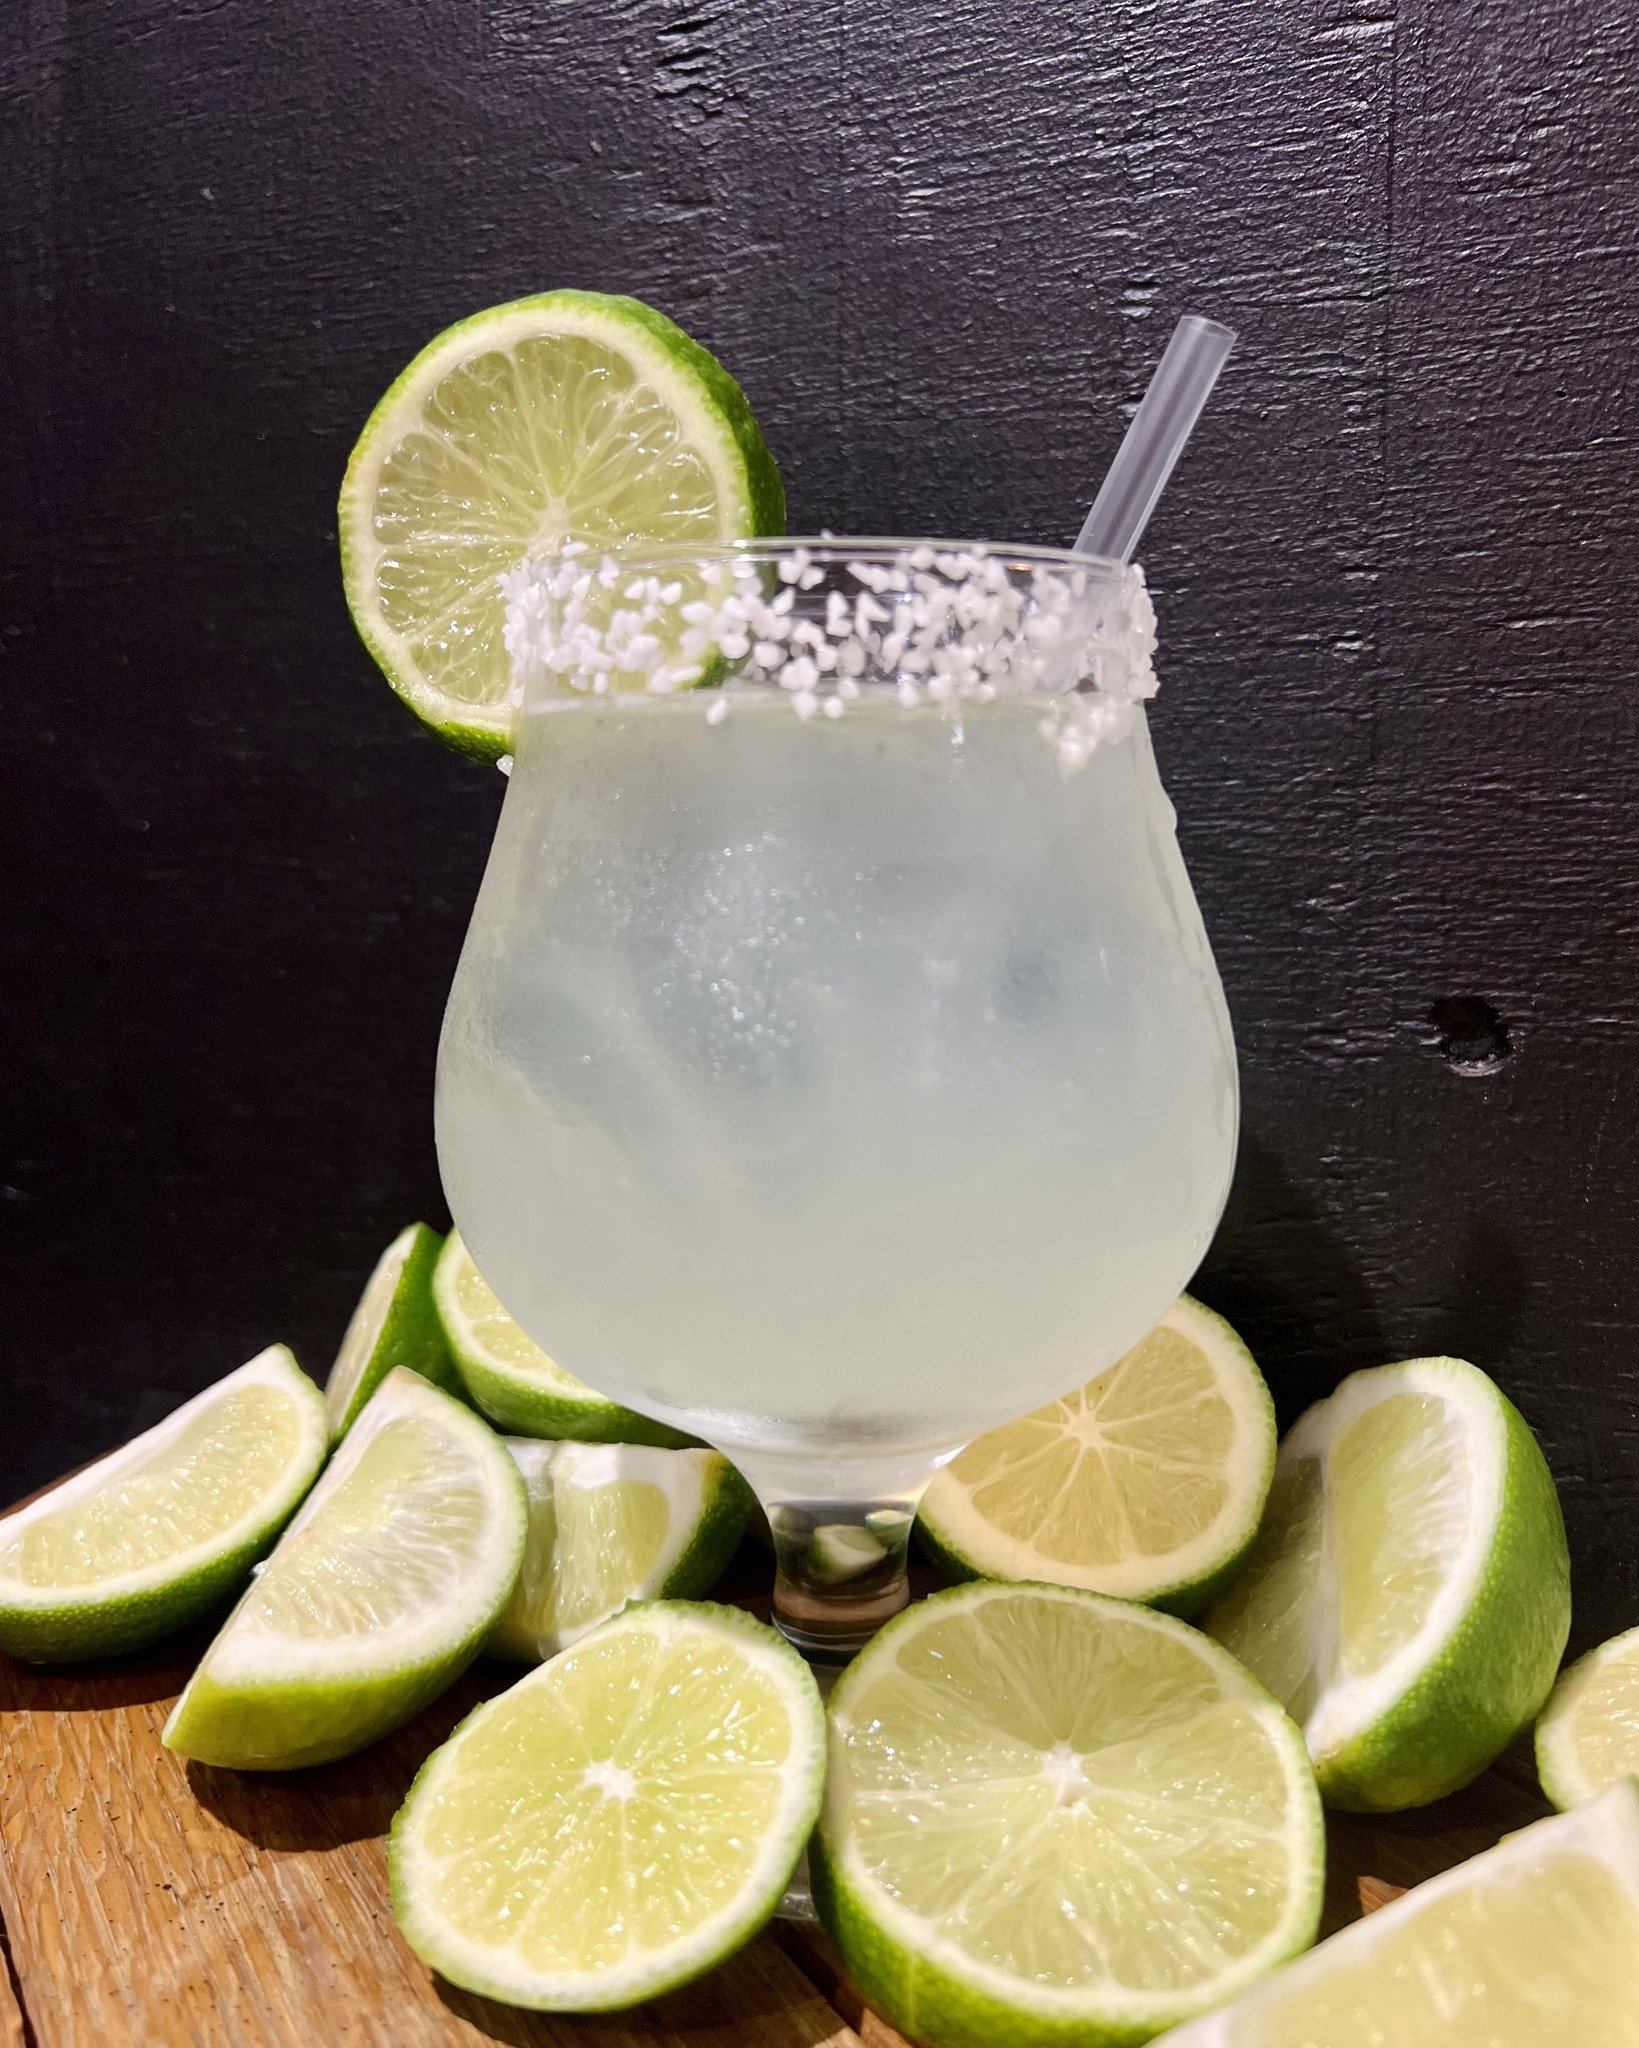 Cinco de Mayo specials happening 12-6 today! 

Lemon-Ritas 🍋  Light Lagers 🍺  Birria Pupusas by Wanderlust food truck and live latin guitar by Armando 2-5. Salud! 

Let's have ourselves a day.